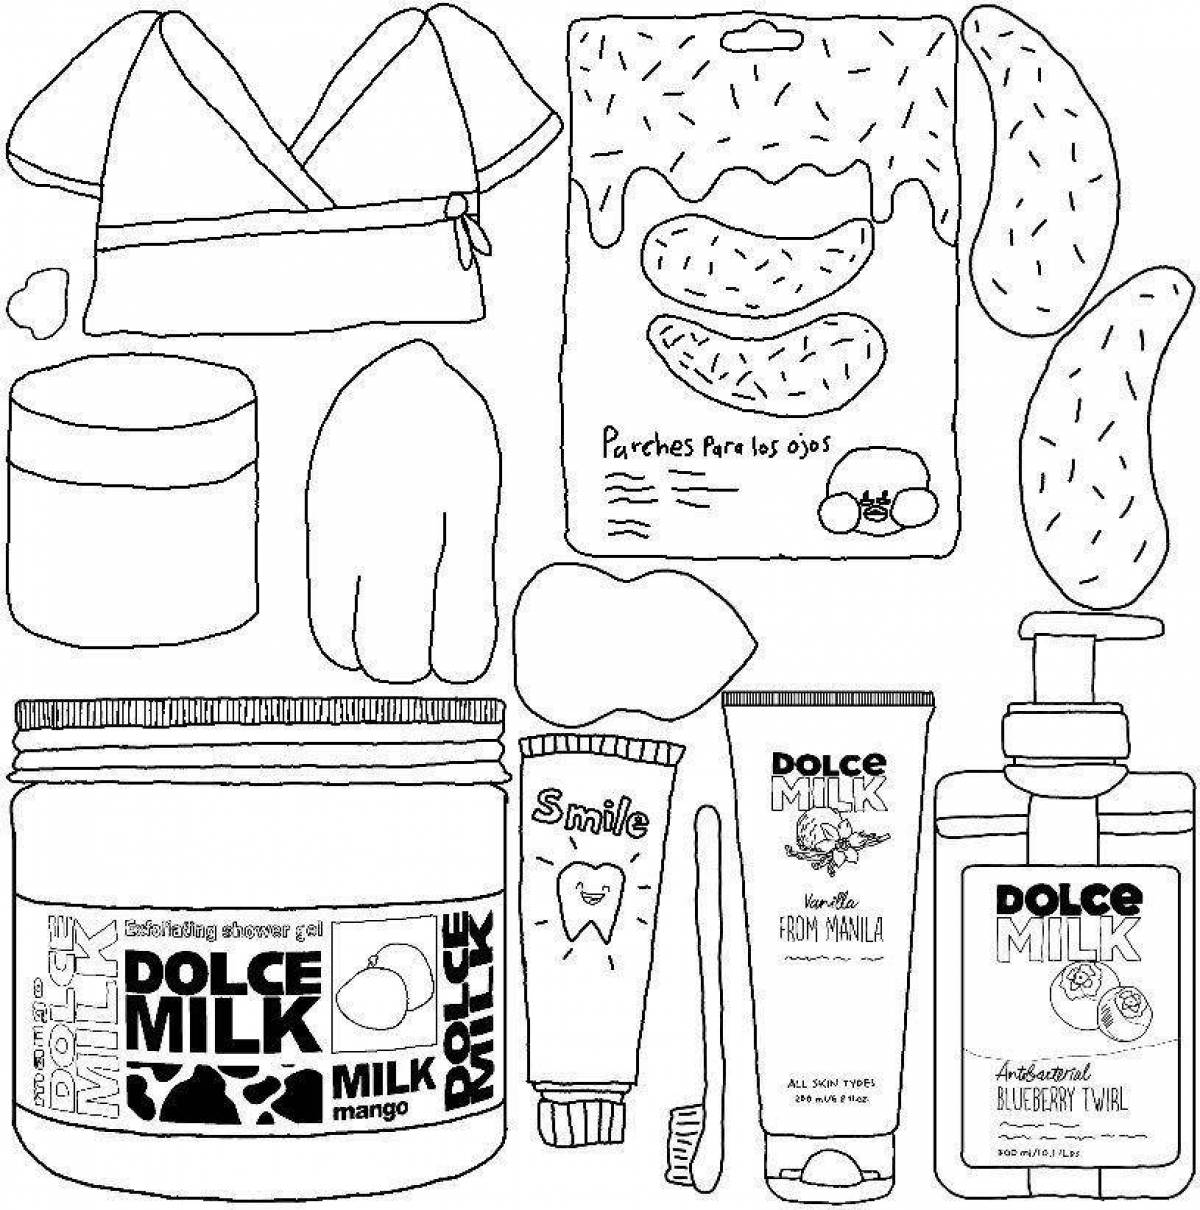 Playful dolce milk antiseptic coloring page